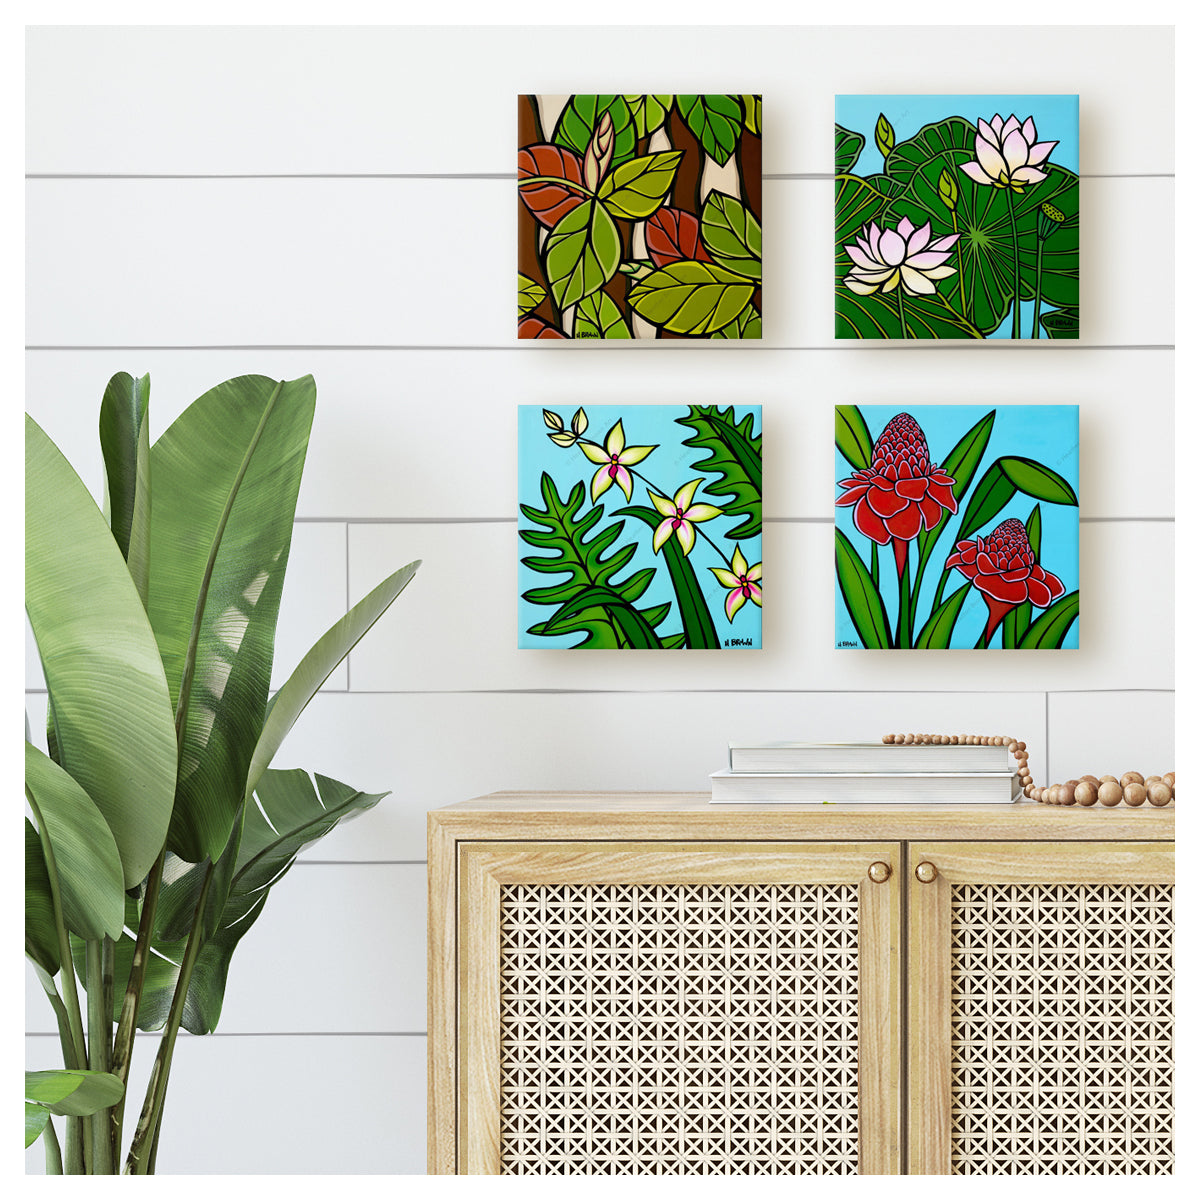 Torch Ginger Canvas Giclée by Hawaii surf artist Heather Brown mockup